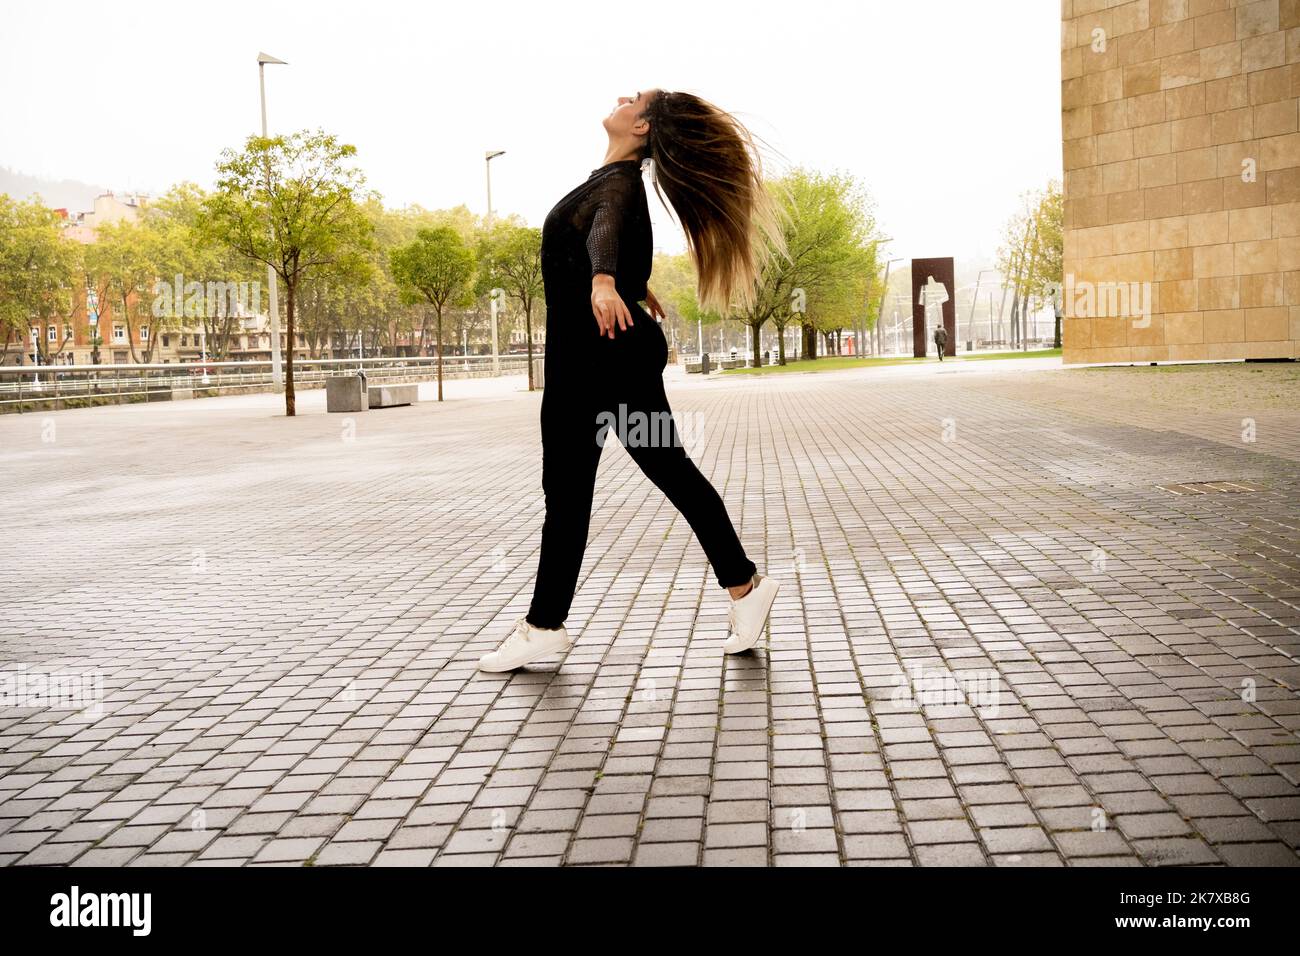 young woman doing ballet figure on the street in the rain Stock Photo